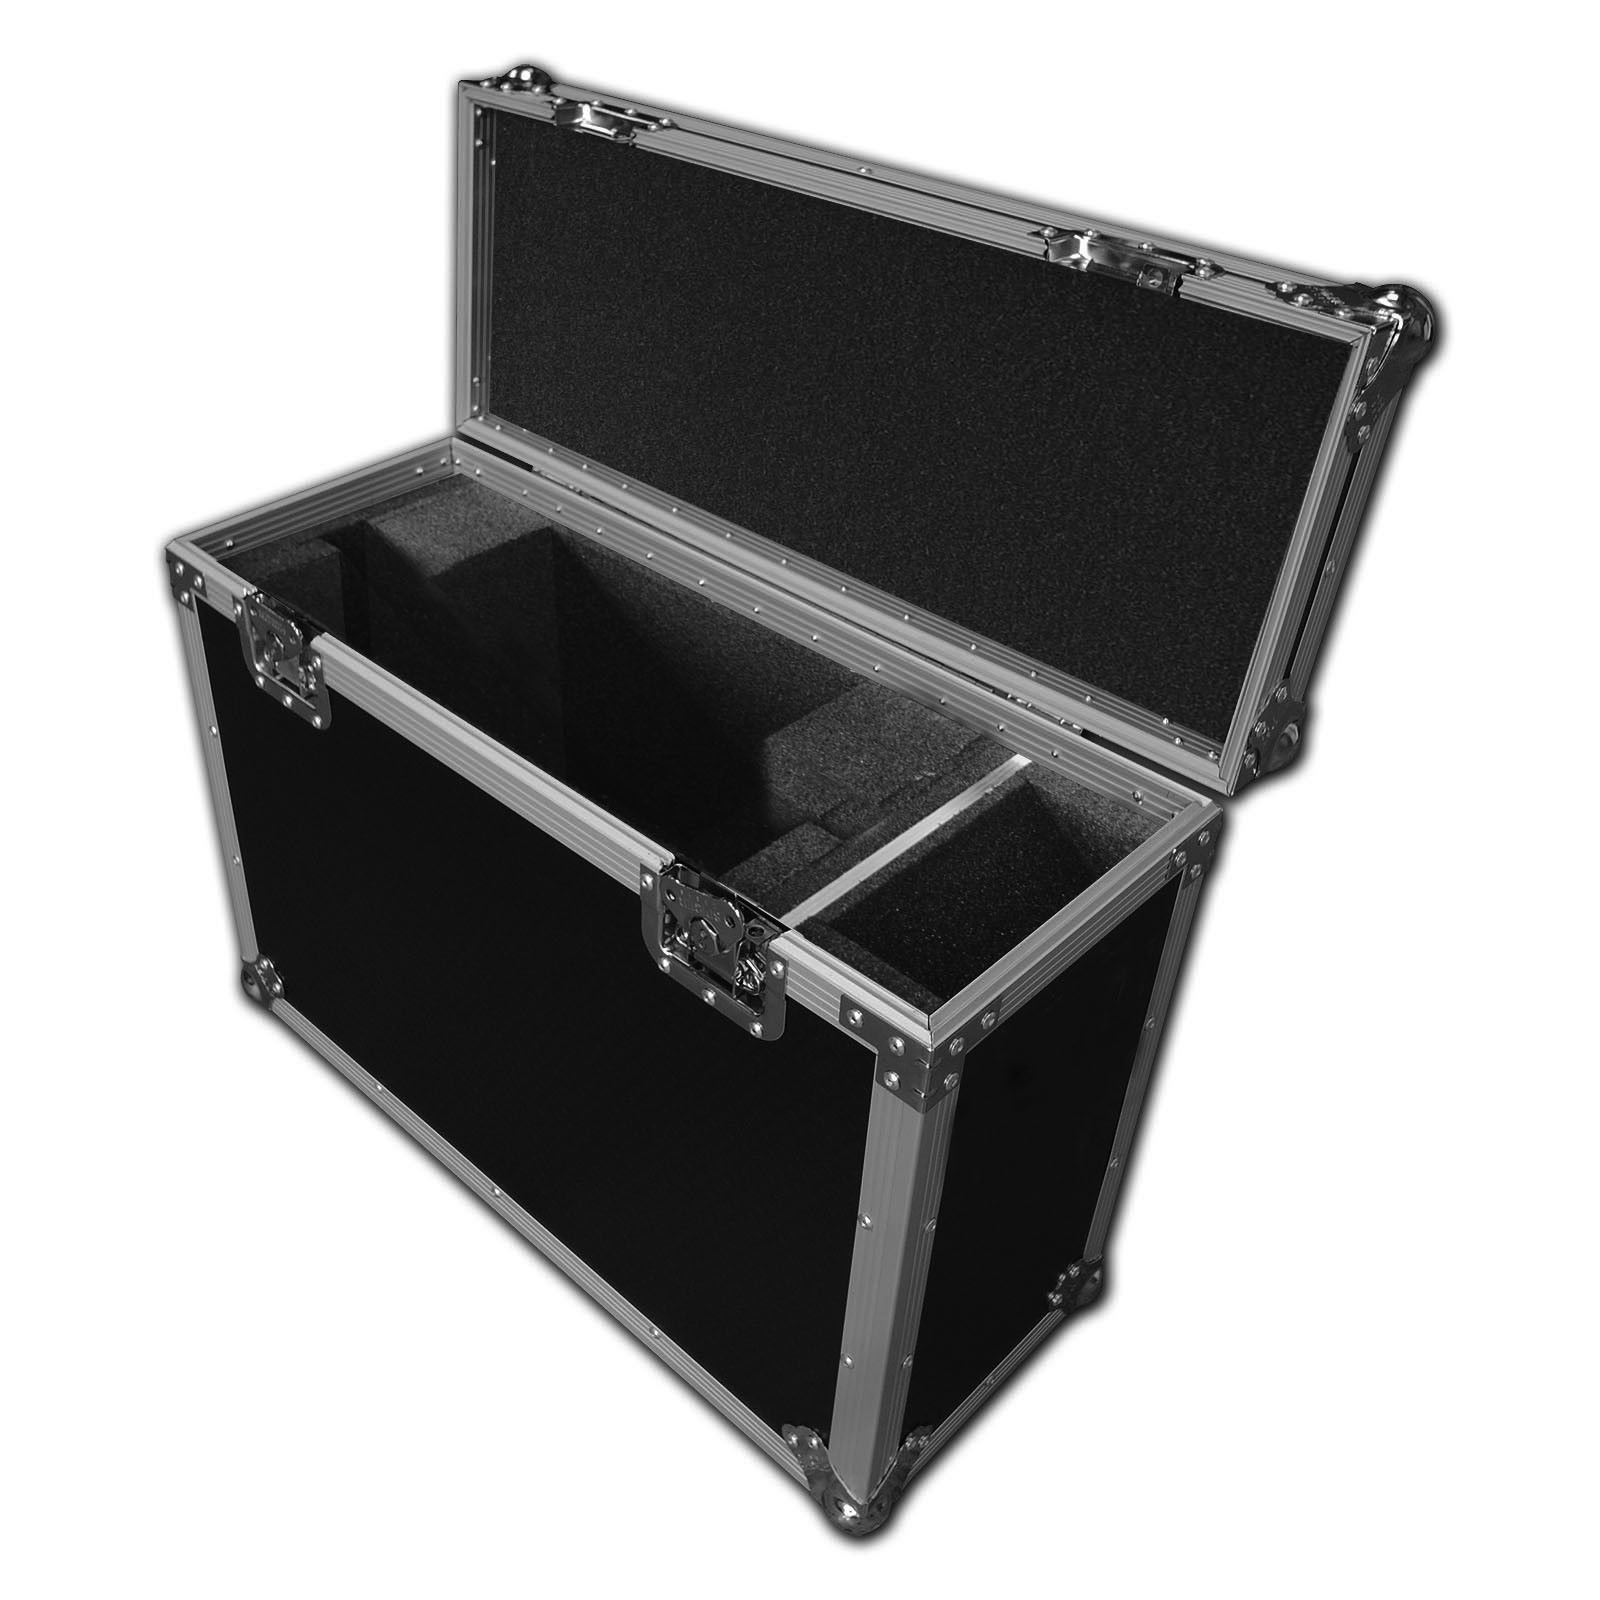 18.5 Video Production LCD Monitor Flight Case for JVC GD-W192 18.5